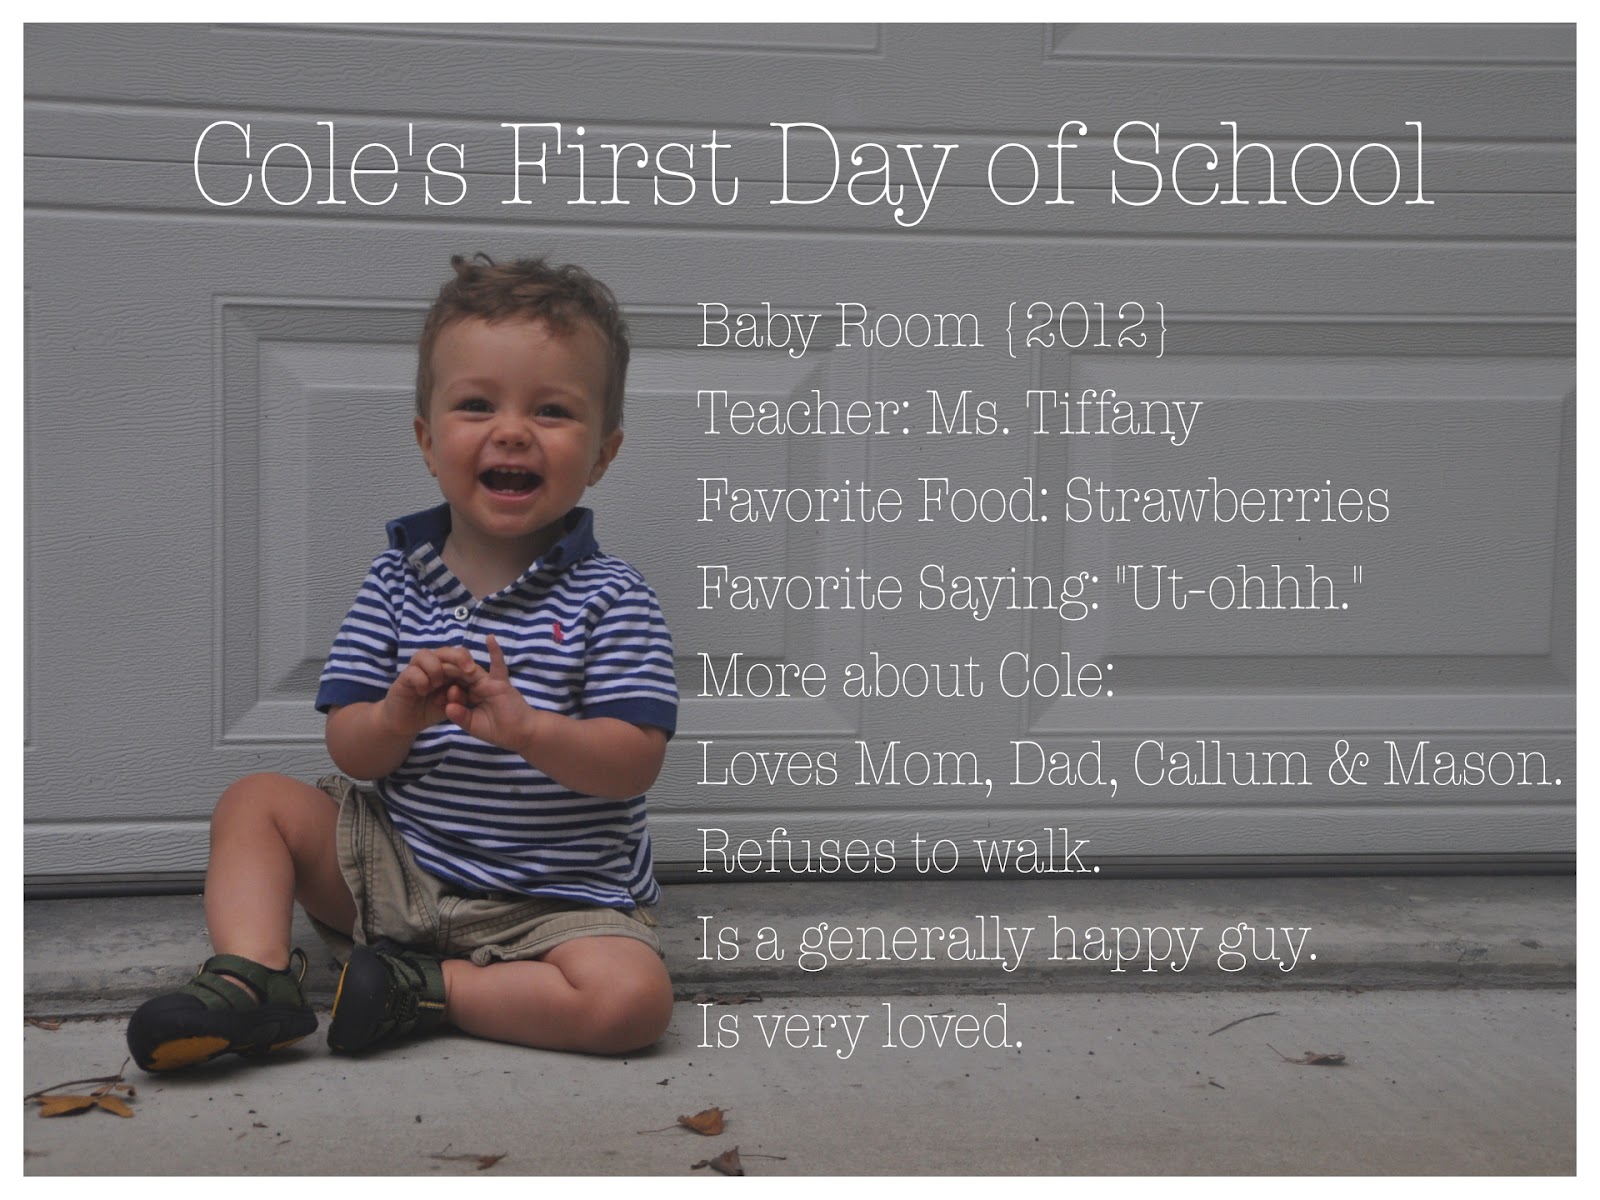 made First Day of School {Pictures}